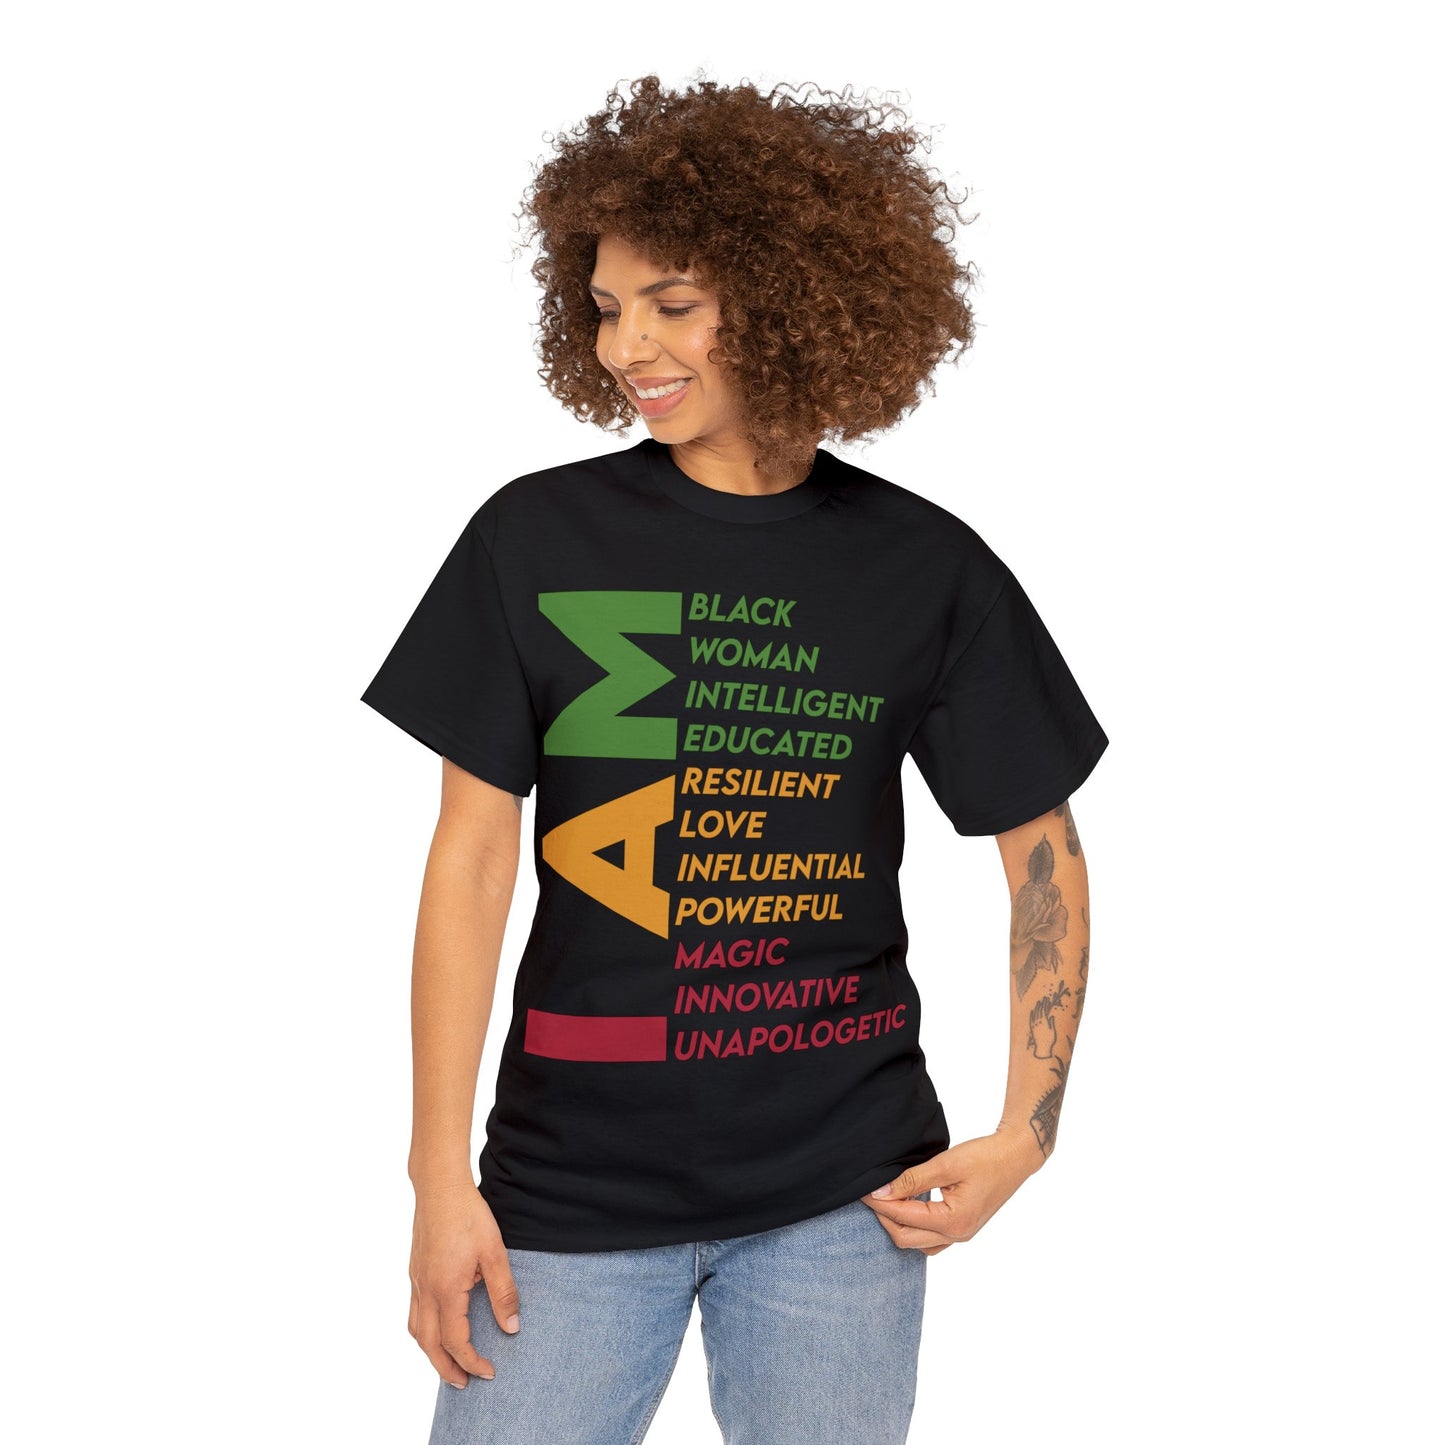 Black Unisex Heavy Cotton Tee saying "I AM: Black Woman, Intelligent, Educated, Resilient, Love, Influential, Powerful, Magic, Innovative, and Unapologetic"